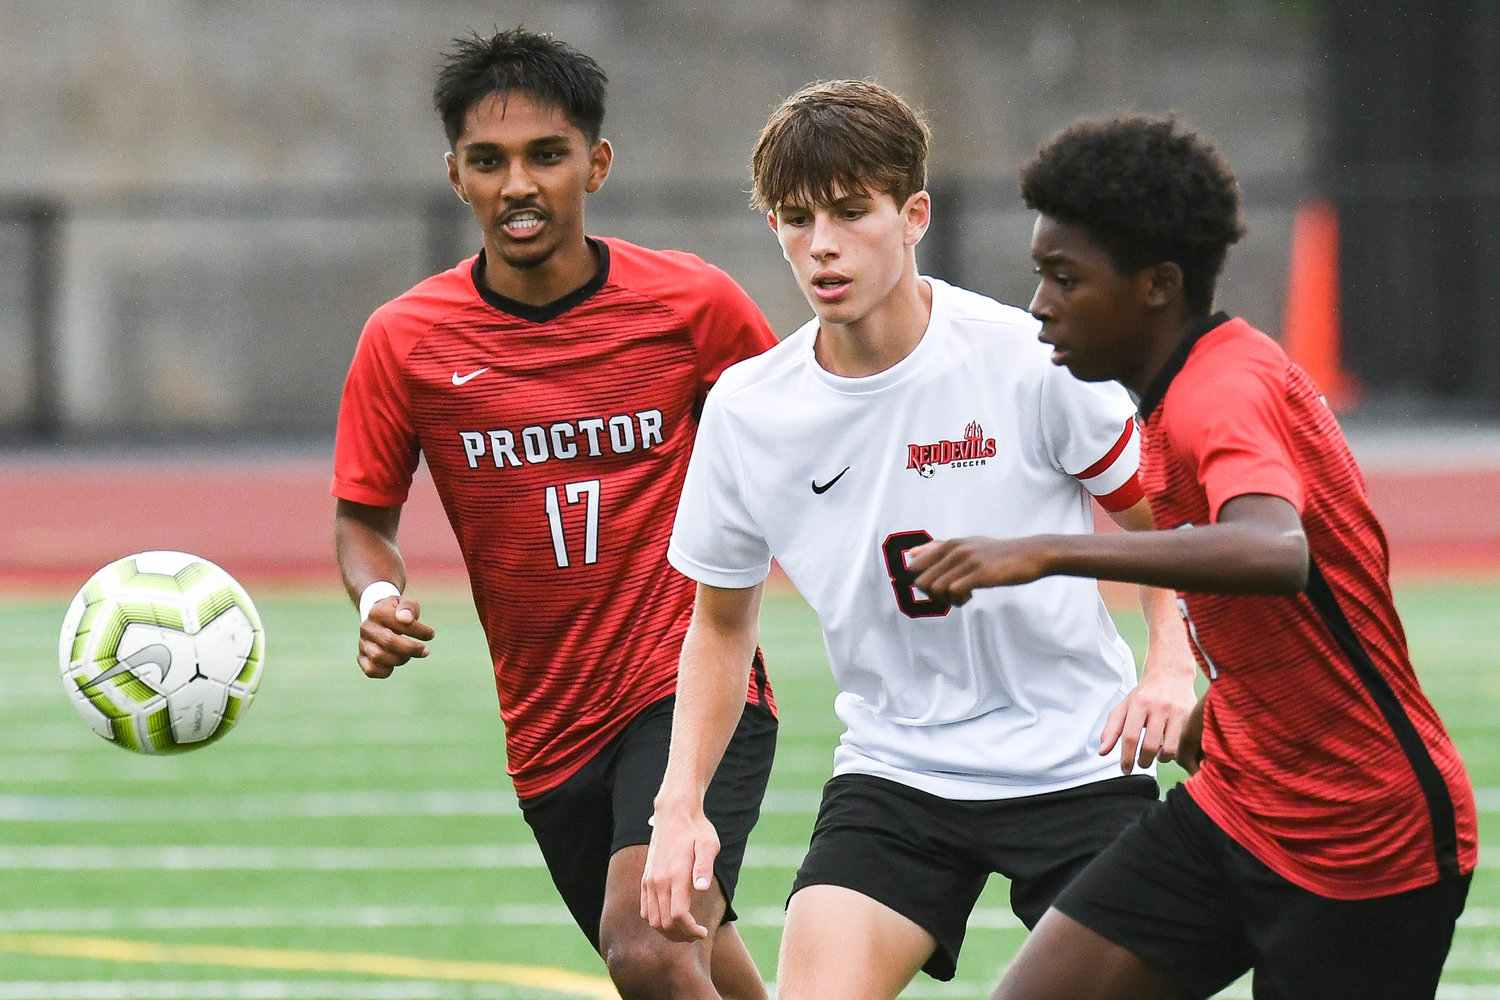 VVS player Ryan Mumford, center, attempts to settle the ball as Proctor players Siidahmed Somow, right, and Weya Myint (17) defend during the soccer game on Tuesday.